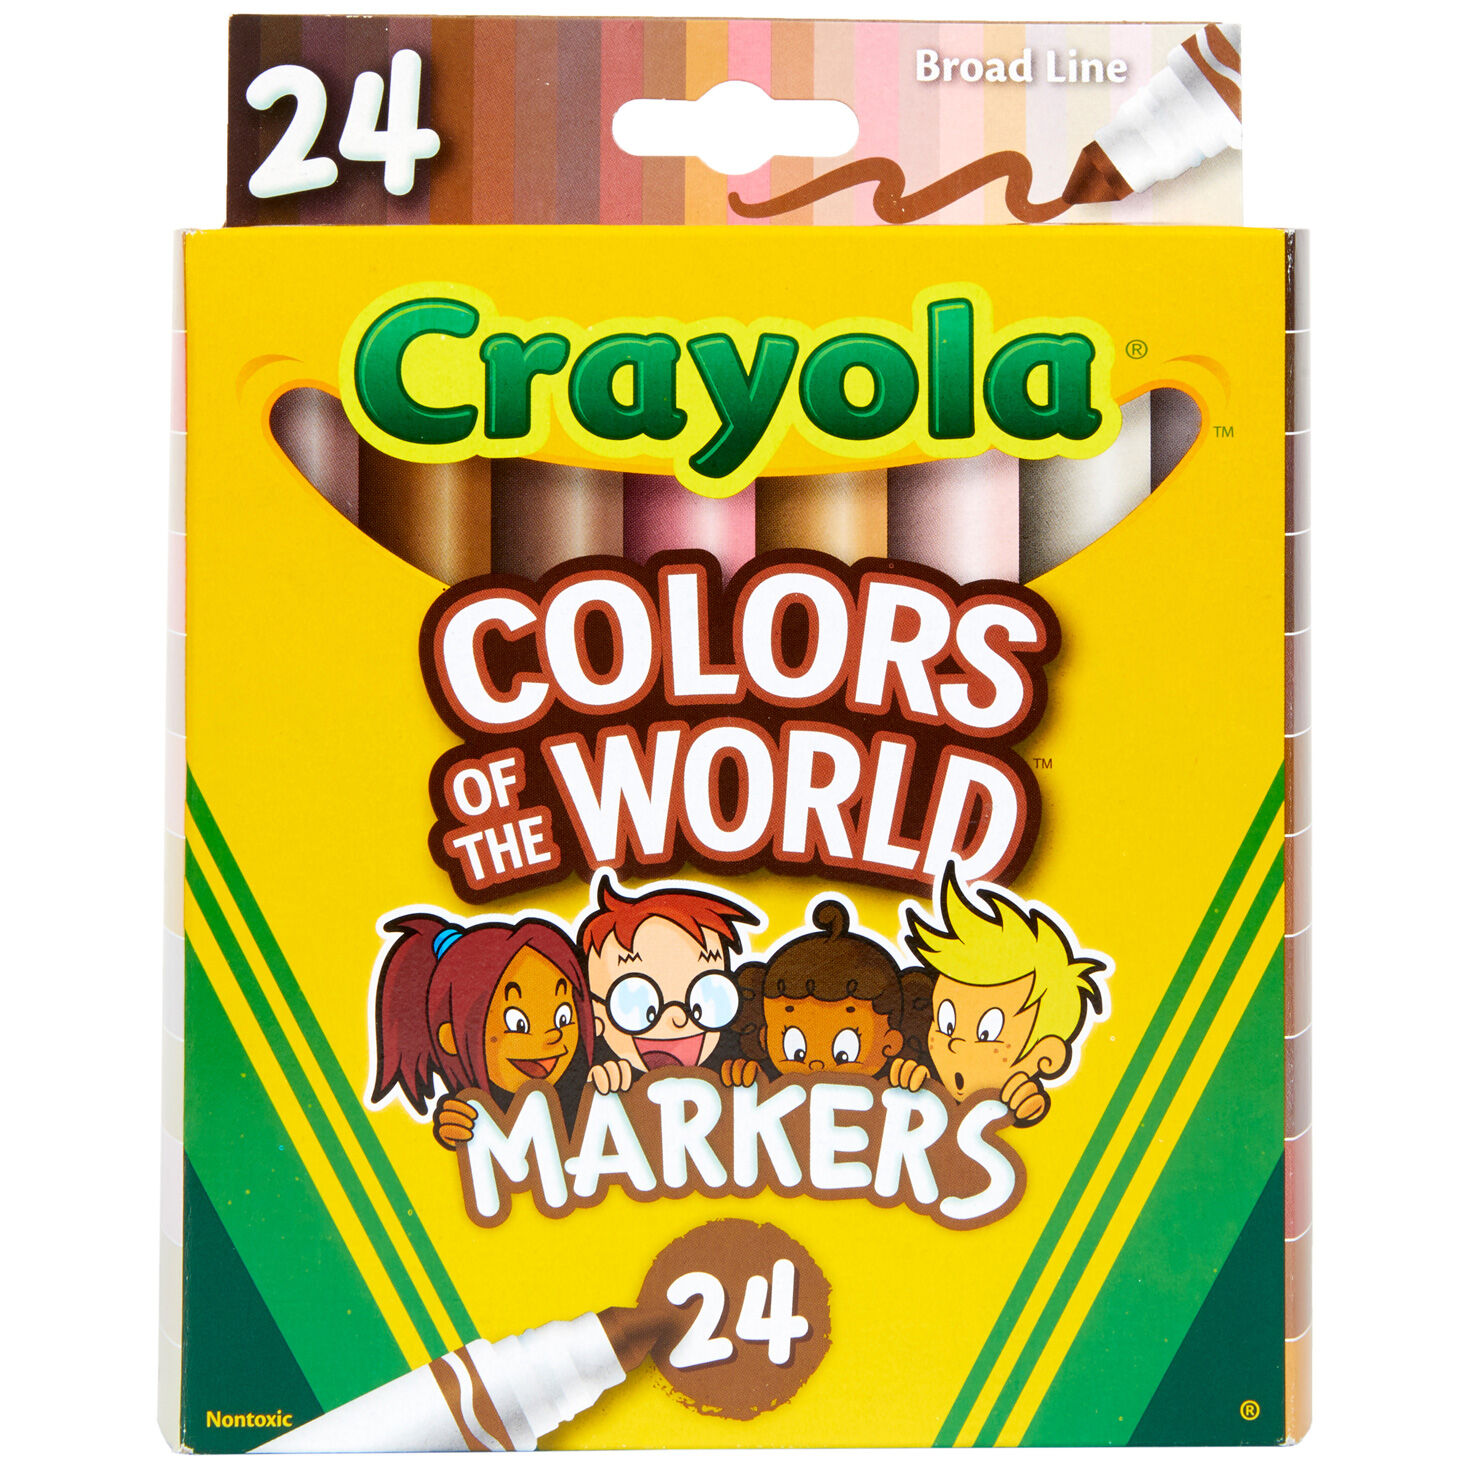 Crayola® Colors of the World Markers, 24-Count - Arts & Crafts